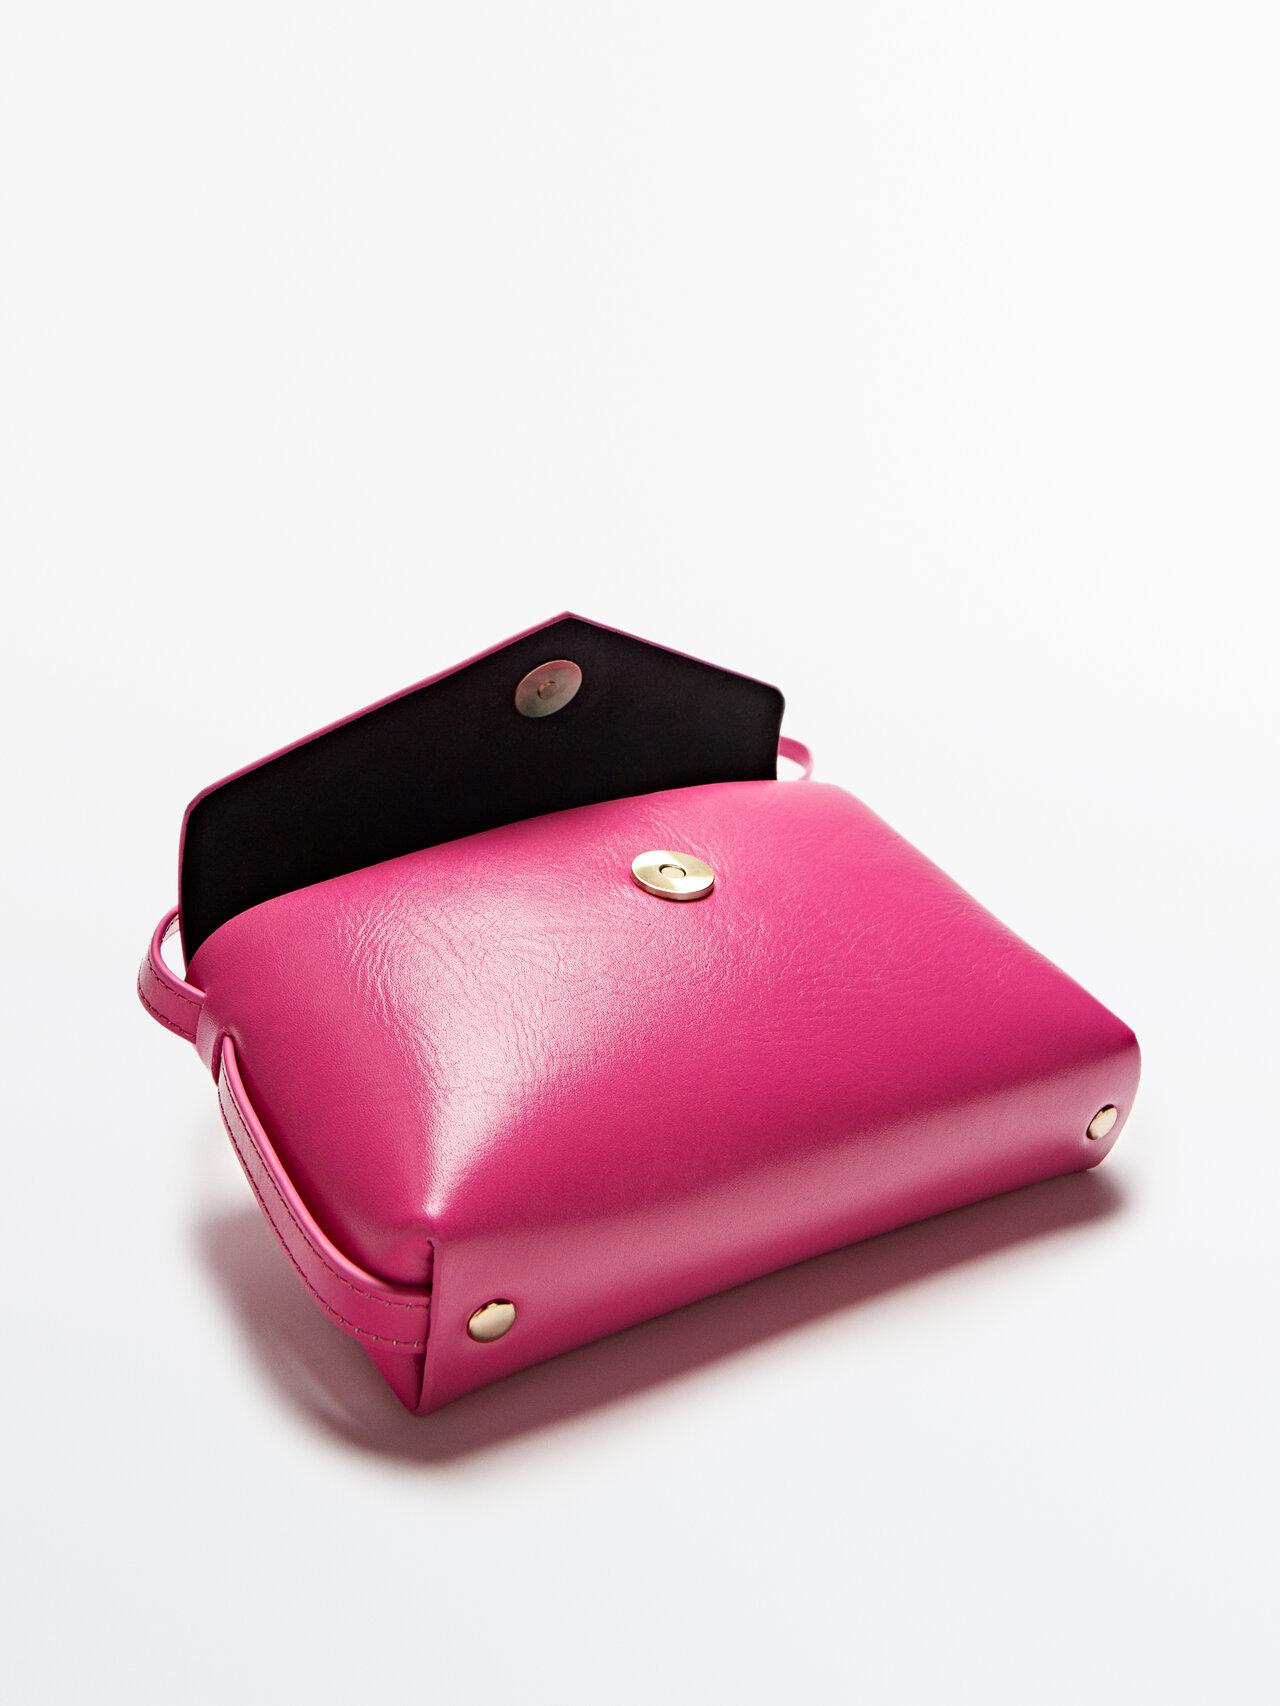 MASSIMO DUTTI Leather Crossbody Clutch Bag in Pink | Lyst